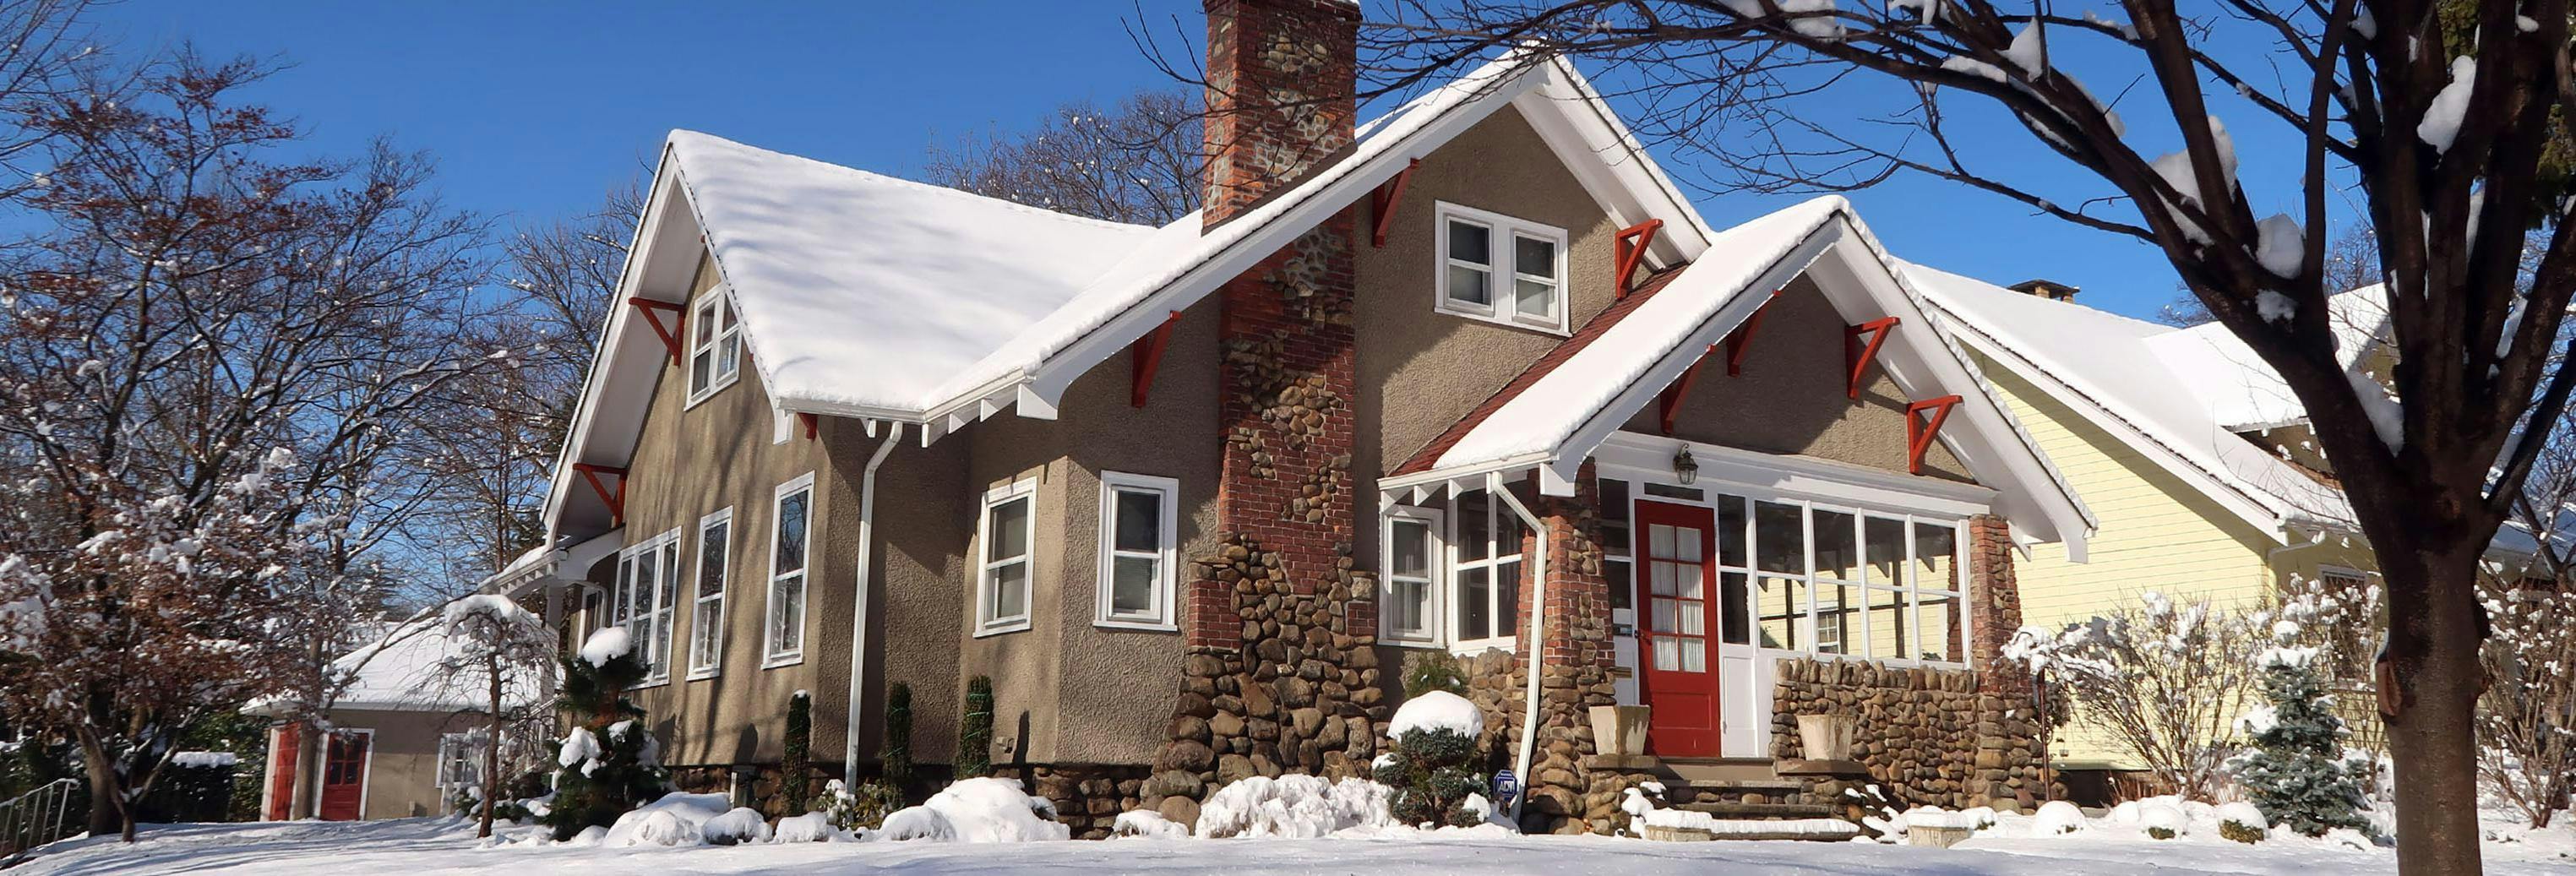 residential home with snow